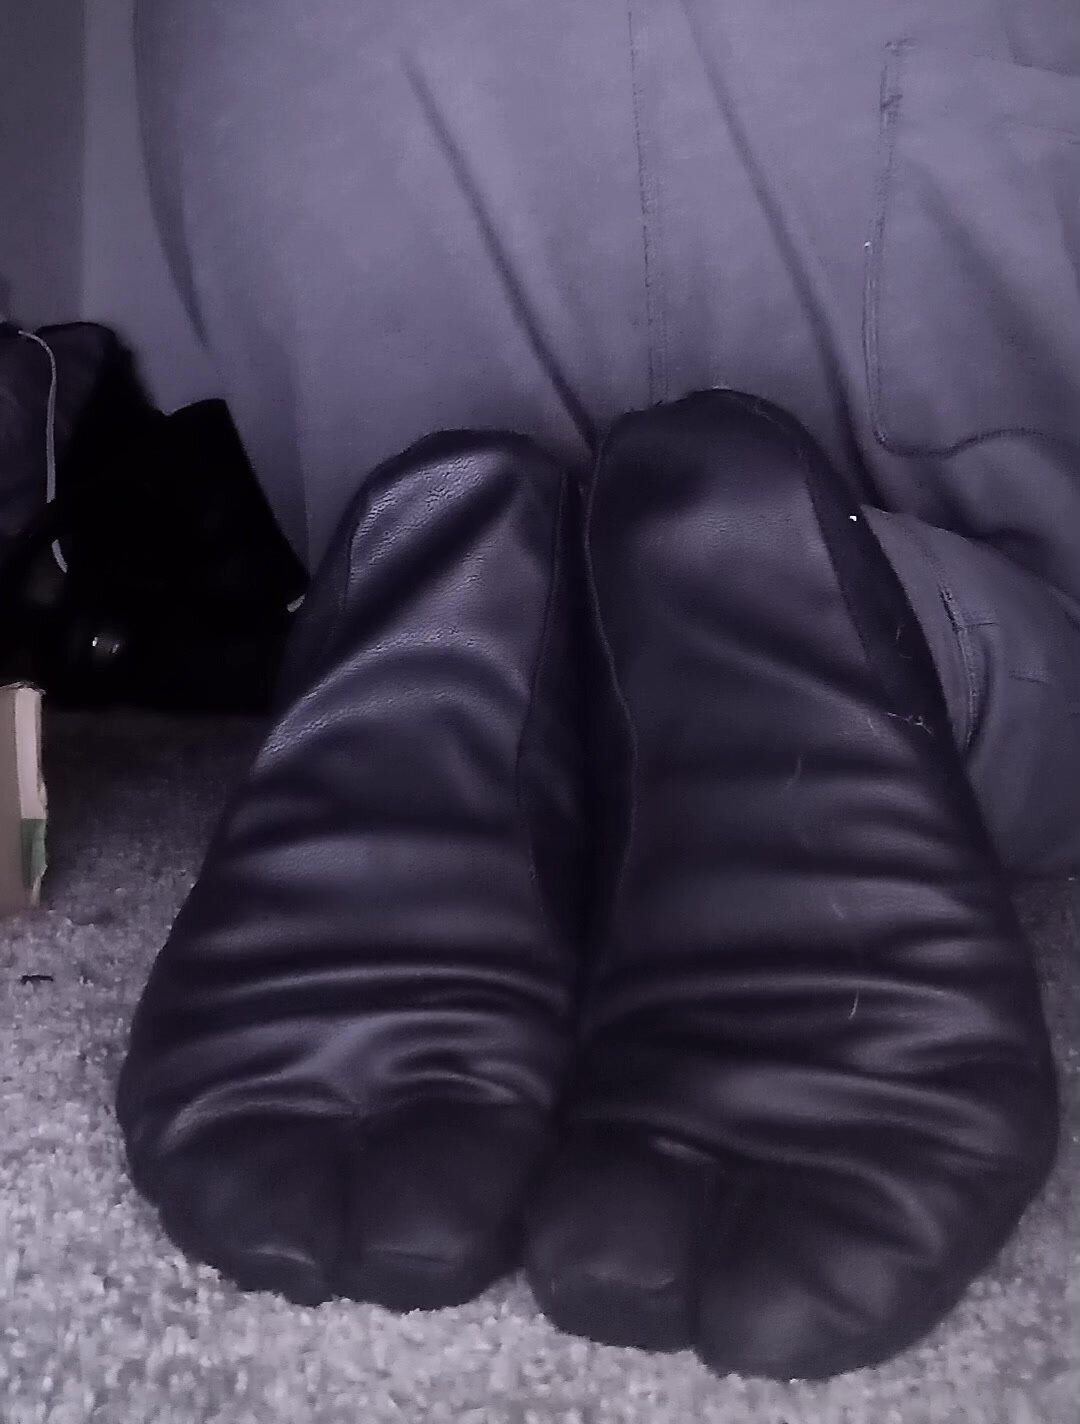 Soft Leather Tabis soles